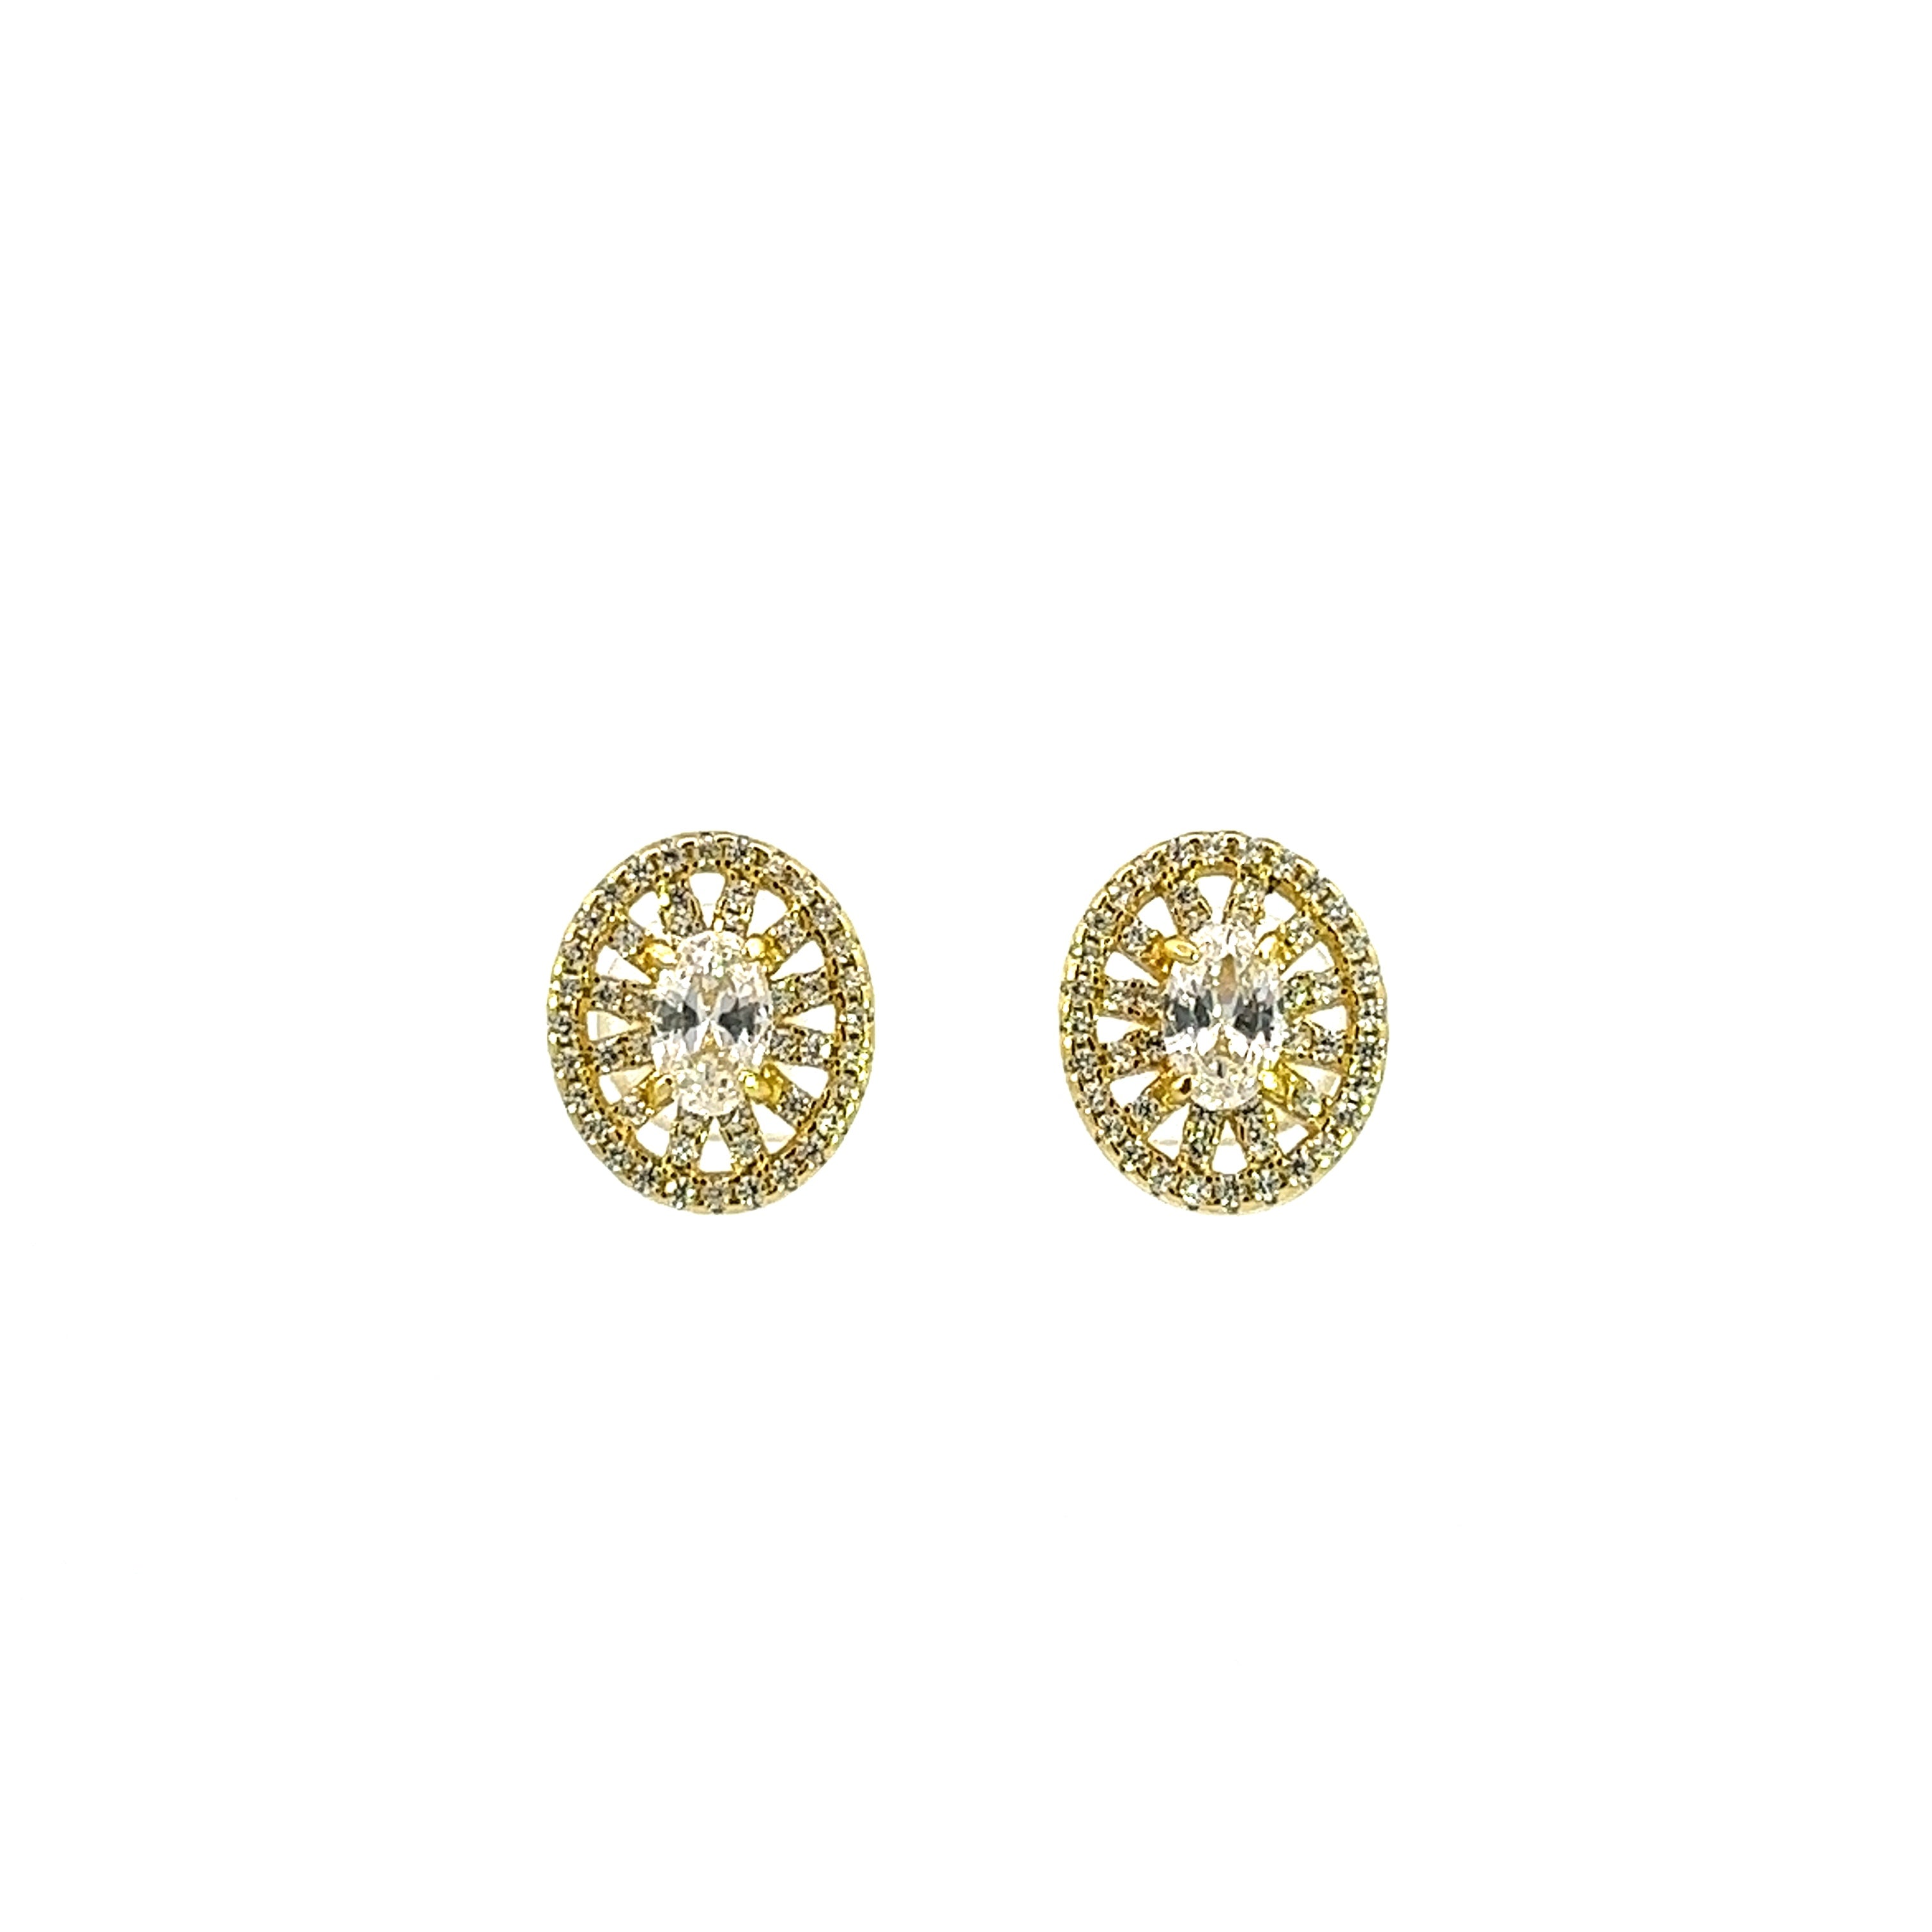 925 GOLD PLATED CUTOUT EARRINGS WITH CRYSTALS